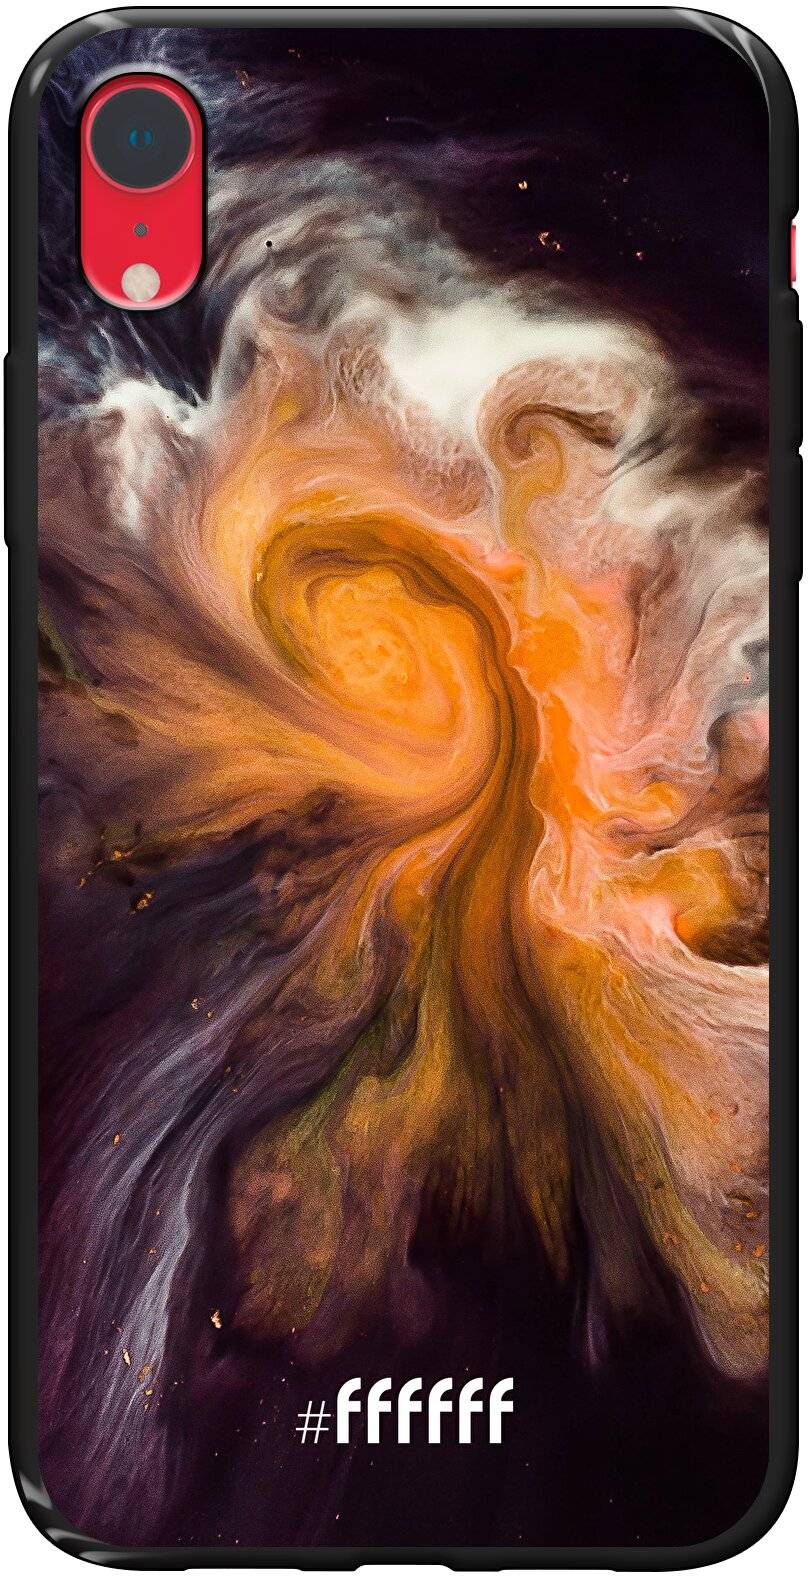 Crazy Space iPhone Xr